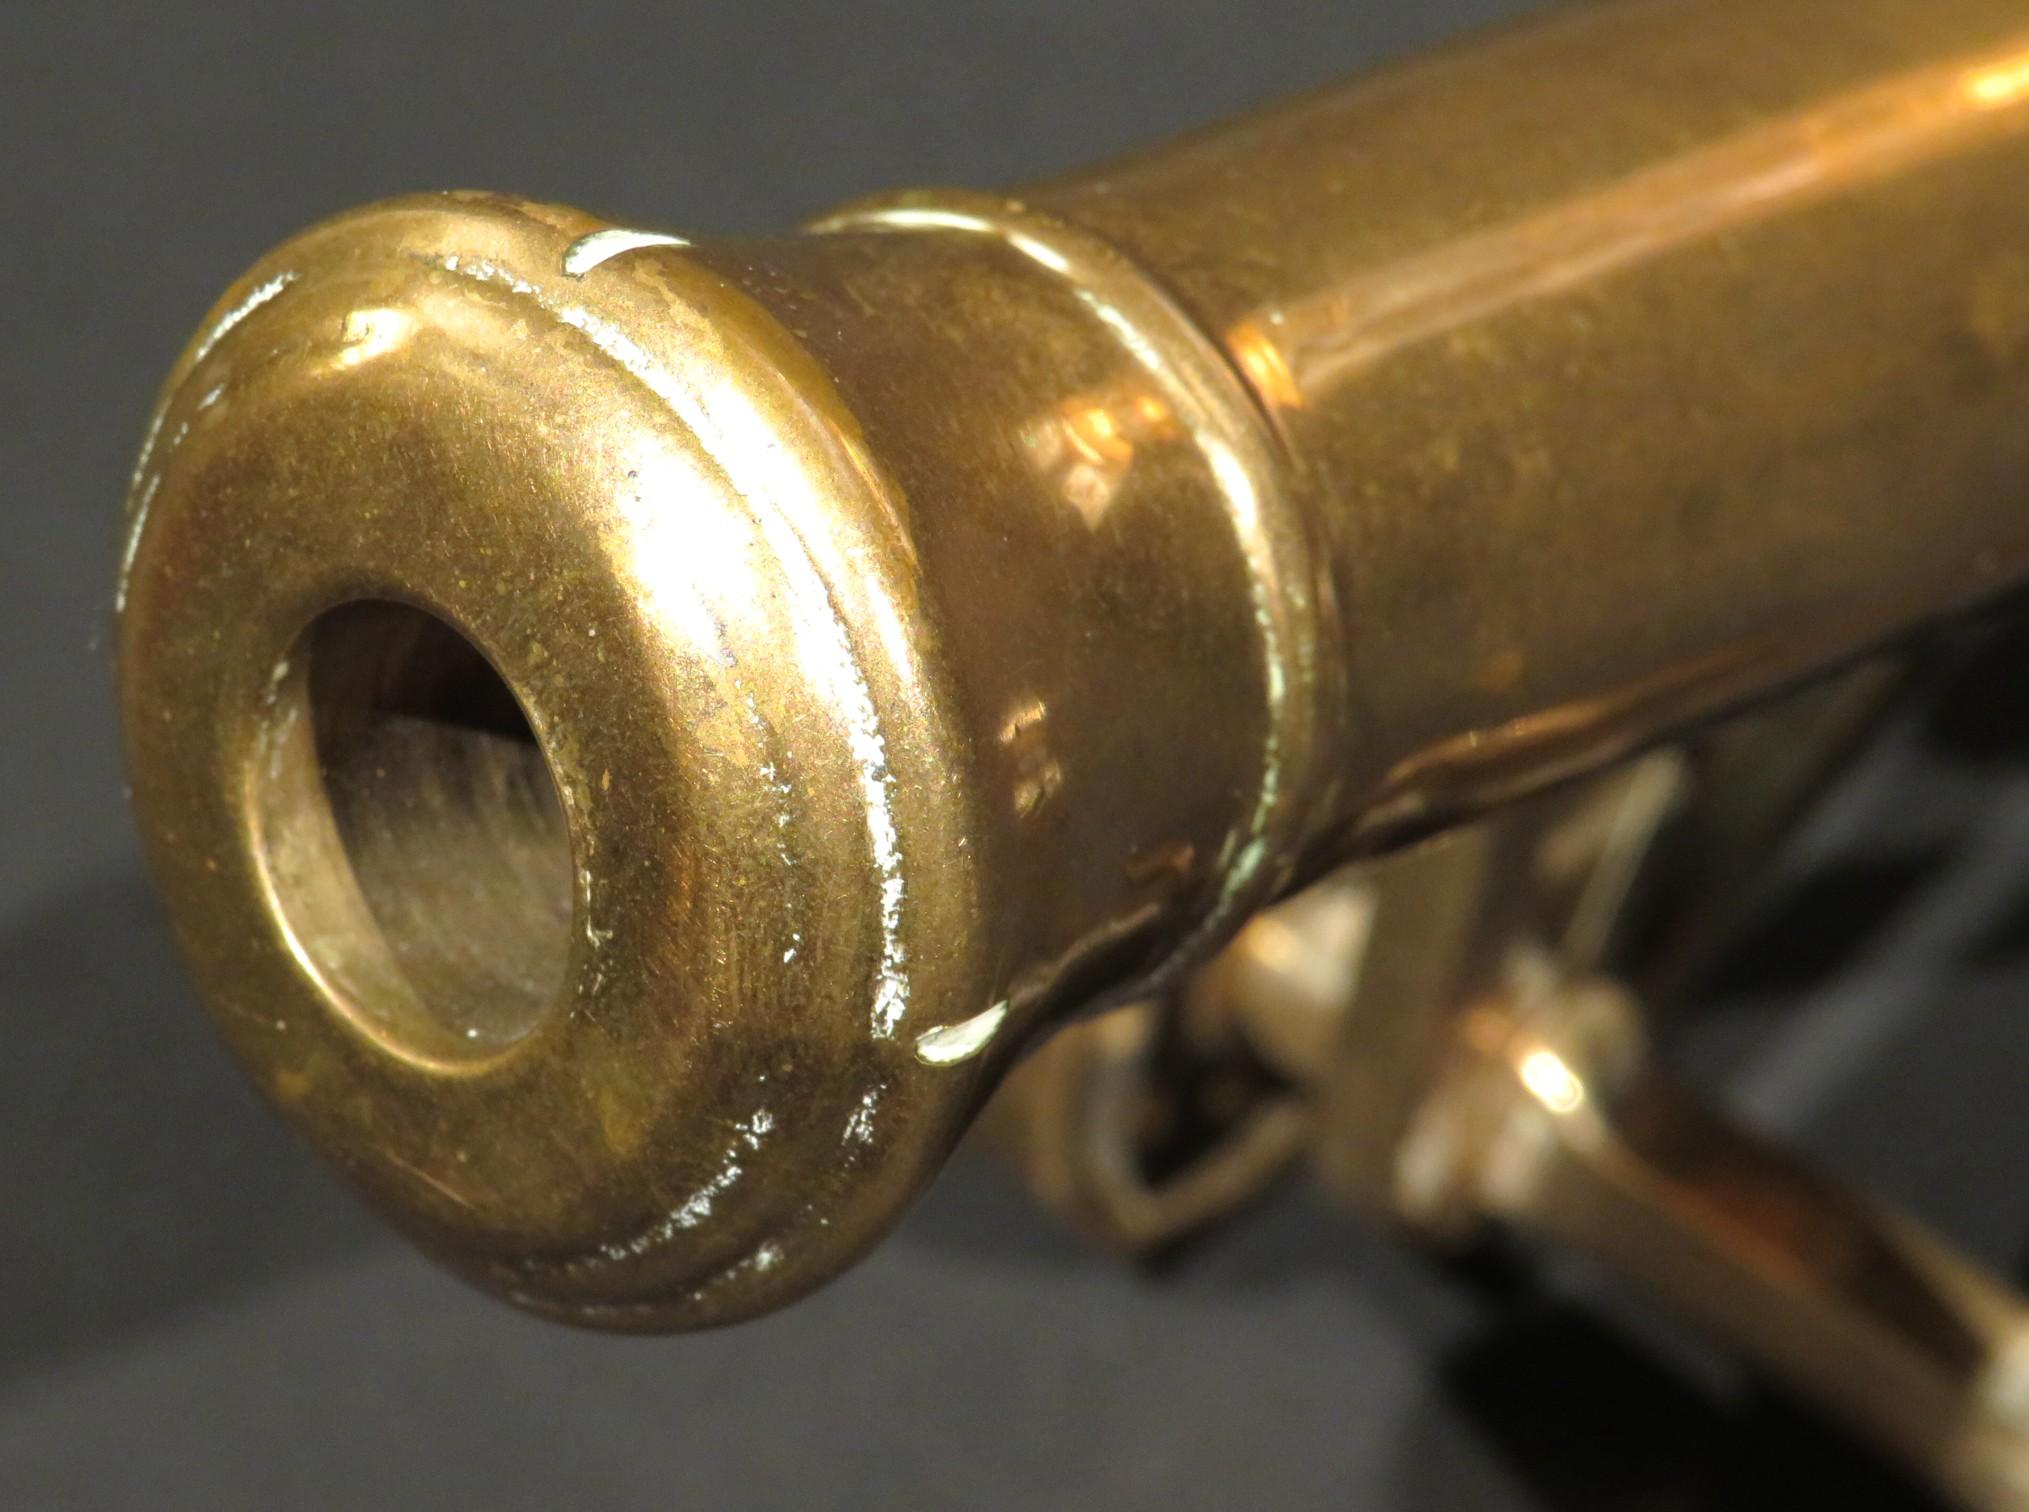 A Fine Model of a 19th C. British 24-Pounder Muzzle-Loading Smoothbore Cannon For Sale 4